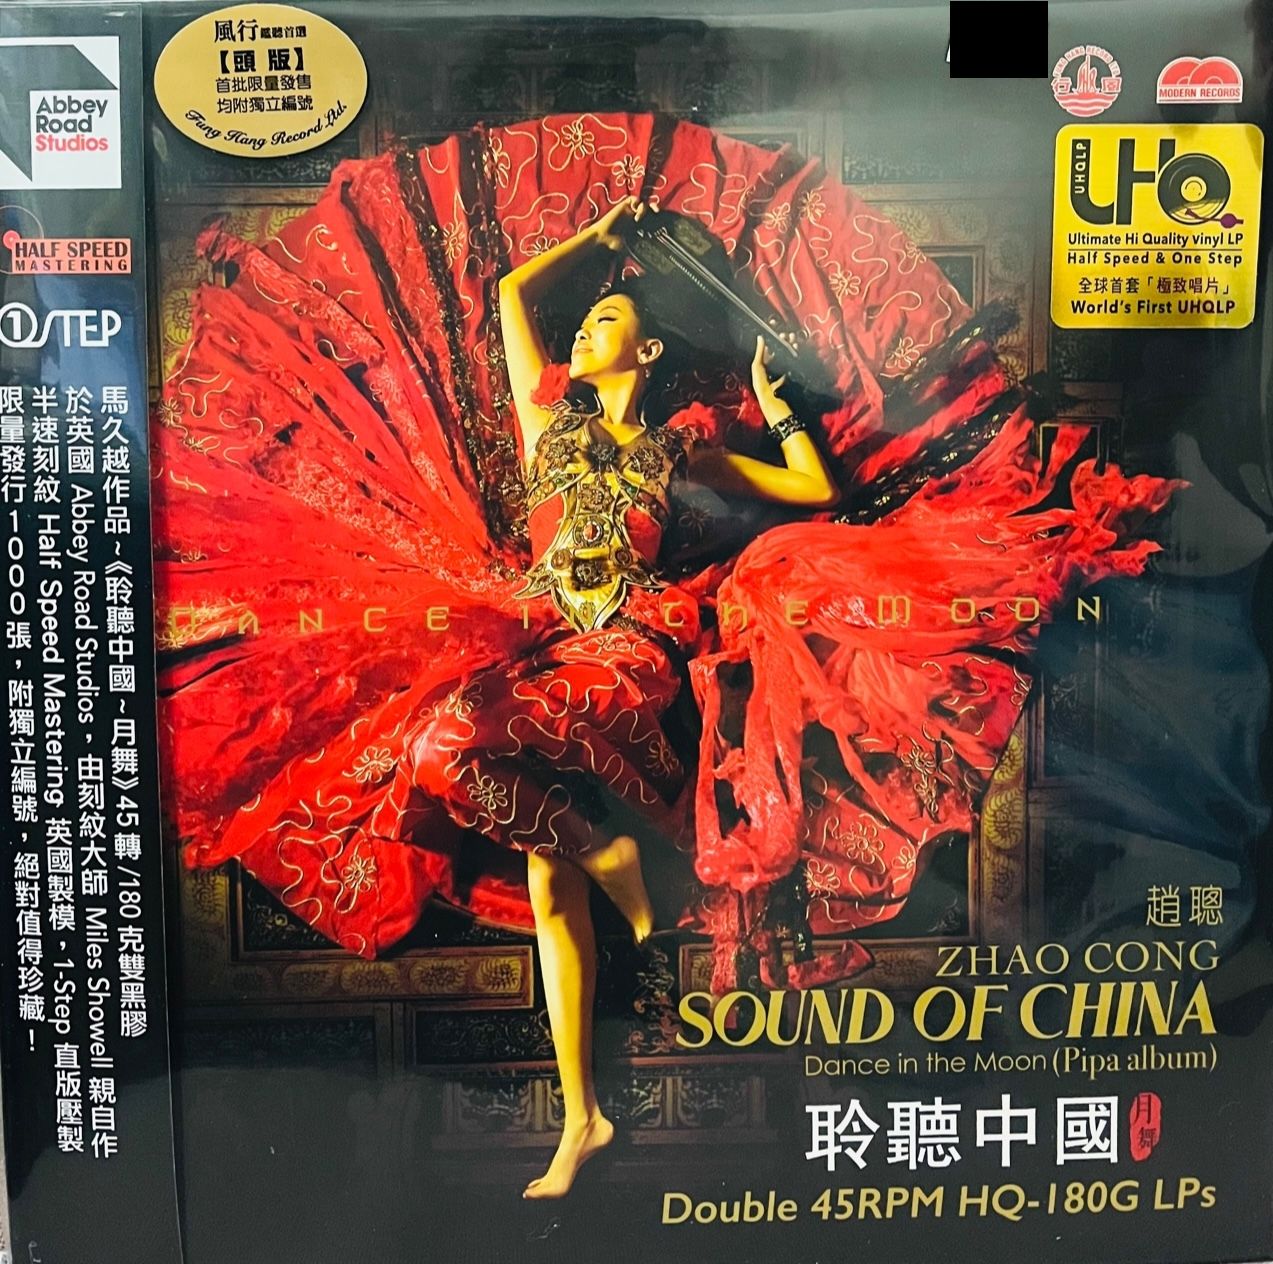 ZHAO CONG -趙聰 DANCE IN THE MOON SOUND OF CHINA ABBEY ROAD) (2 X VINYL) MADE IN U.K